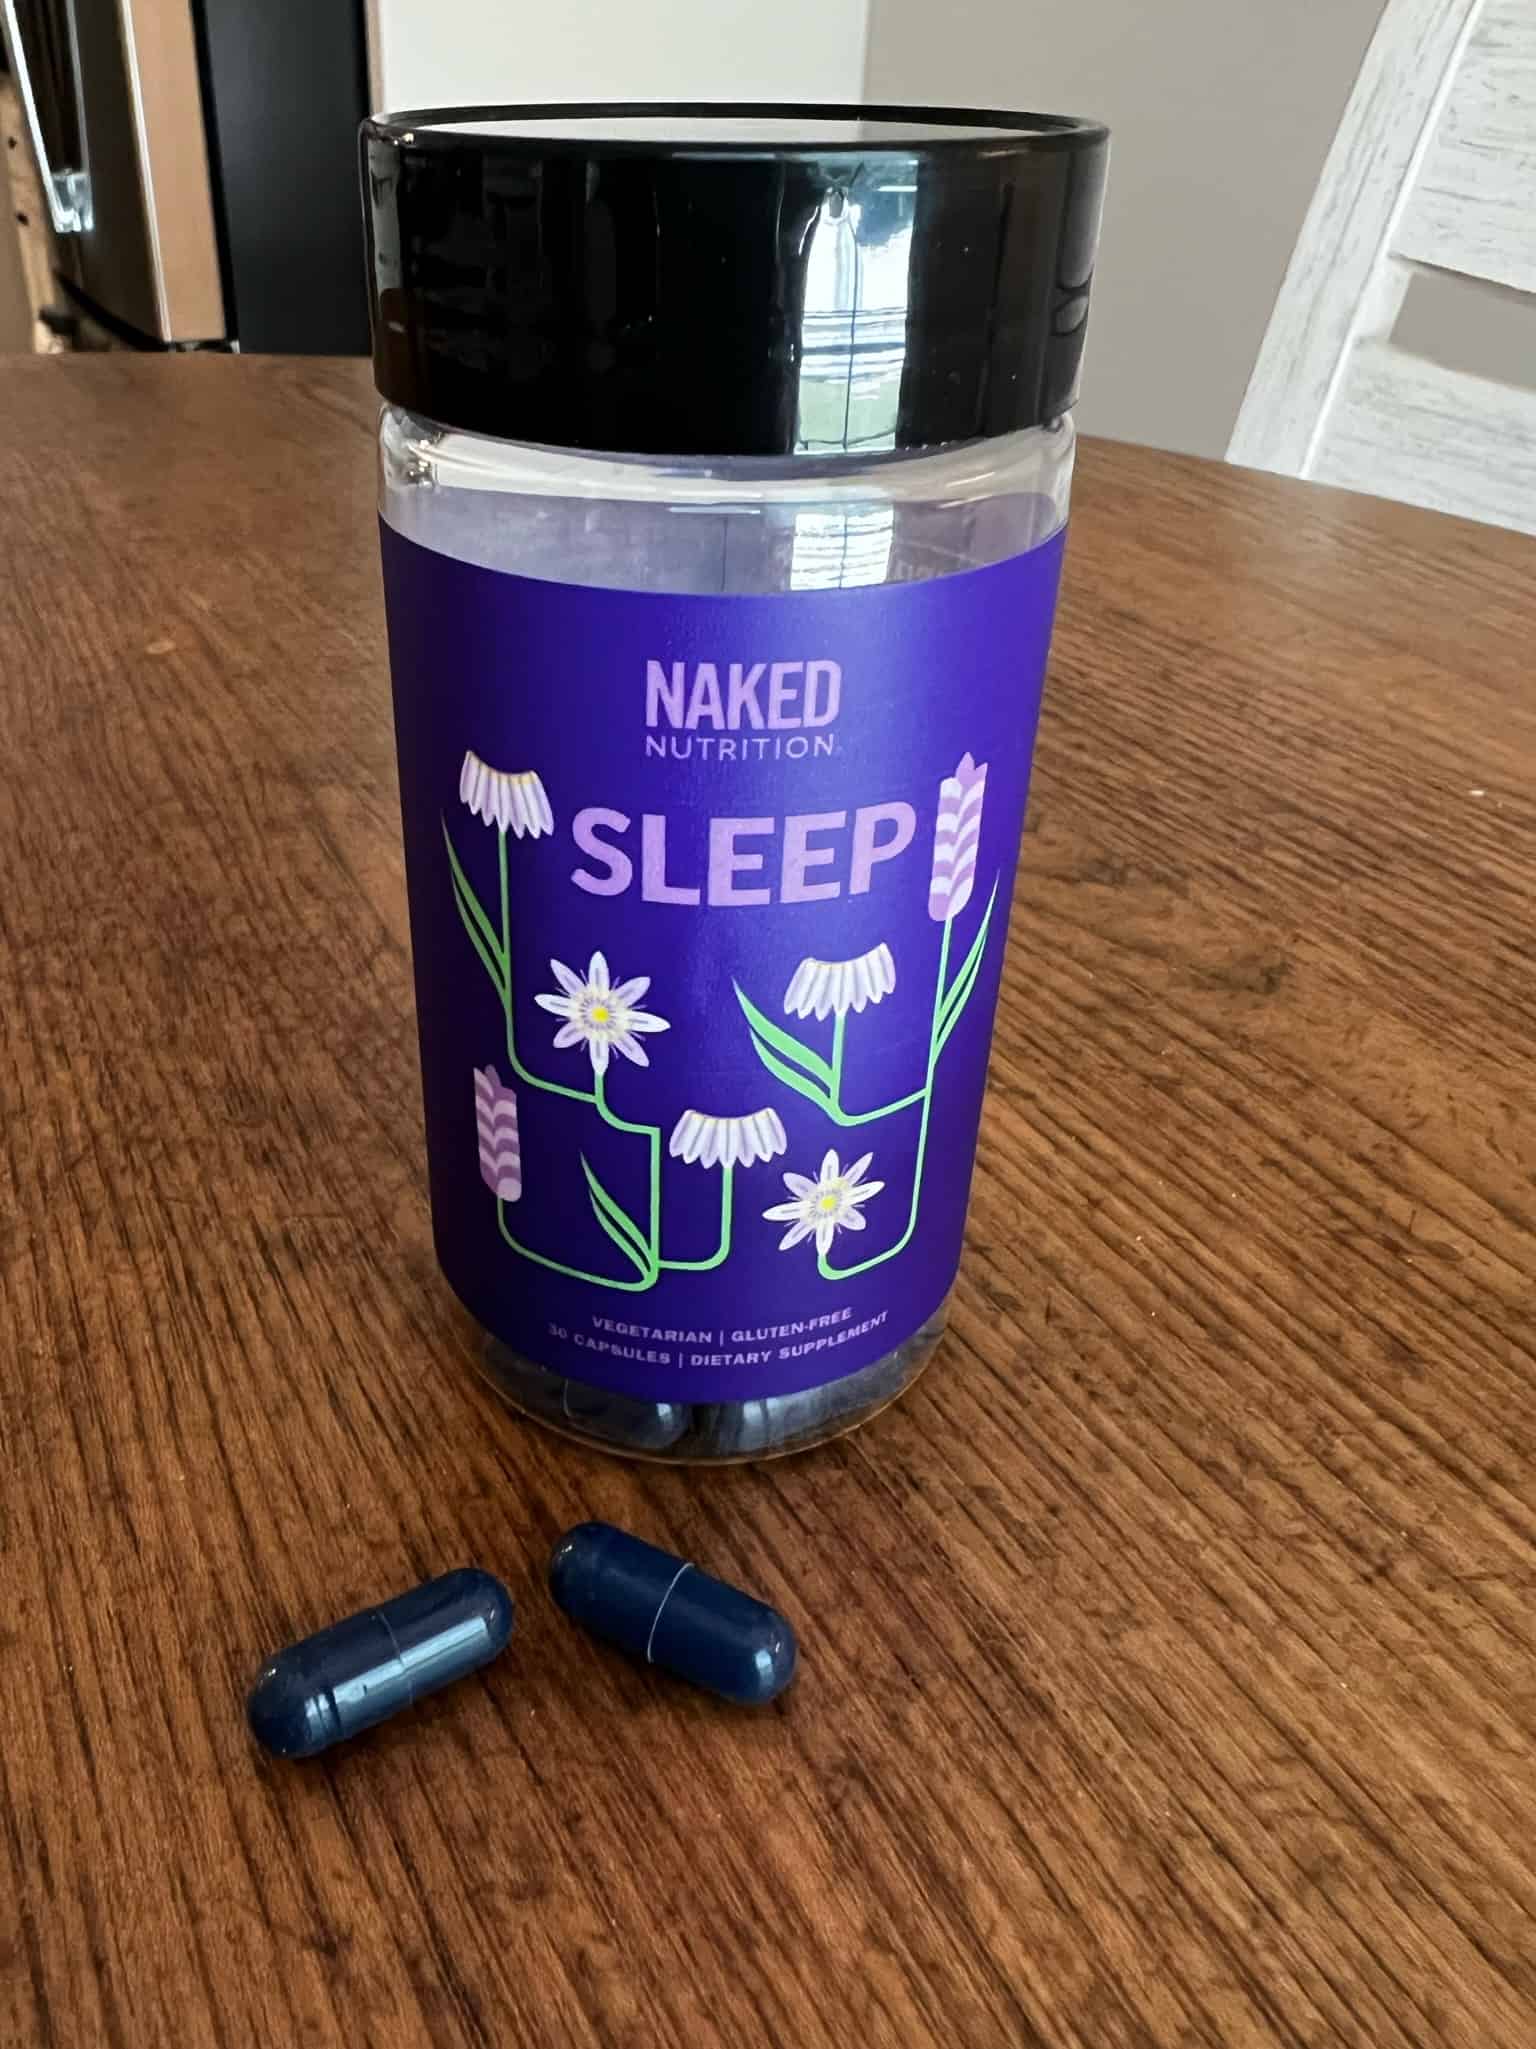 Naked Nutrition Sleep Supplement bottle and capsules on a table